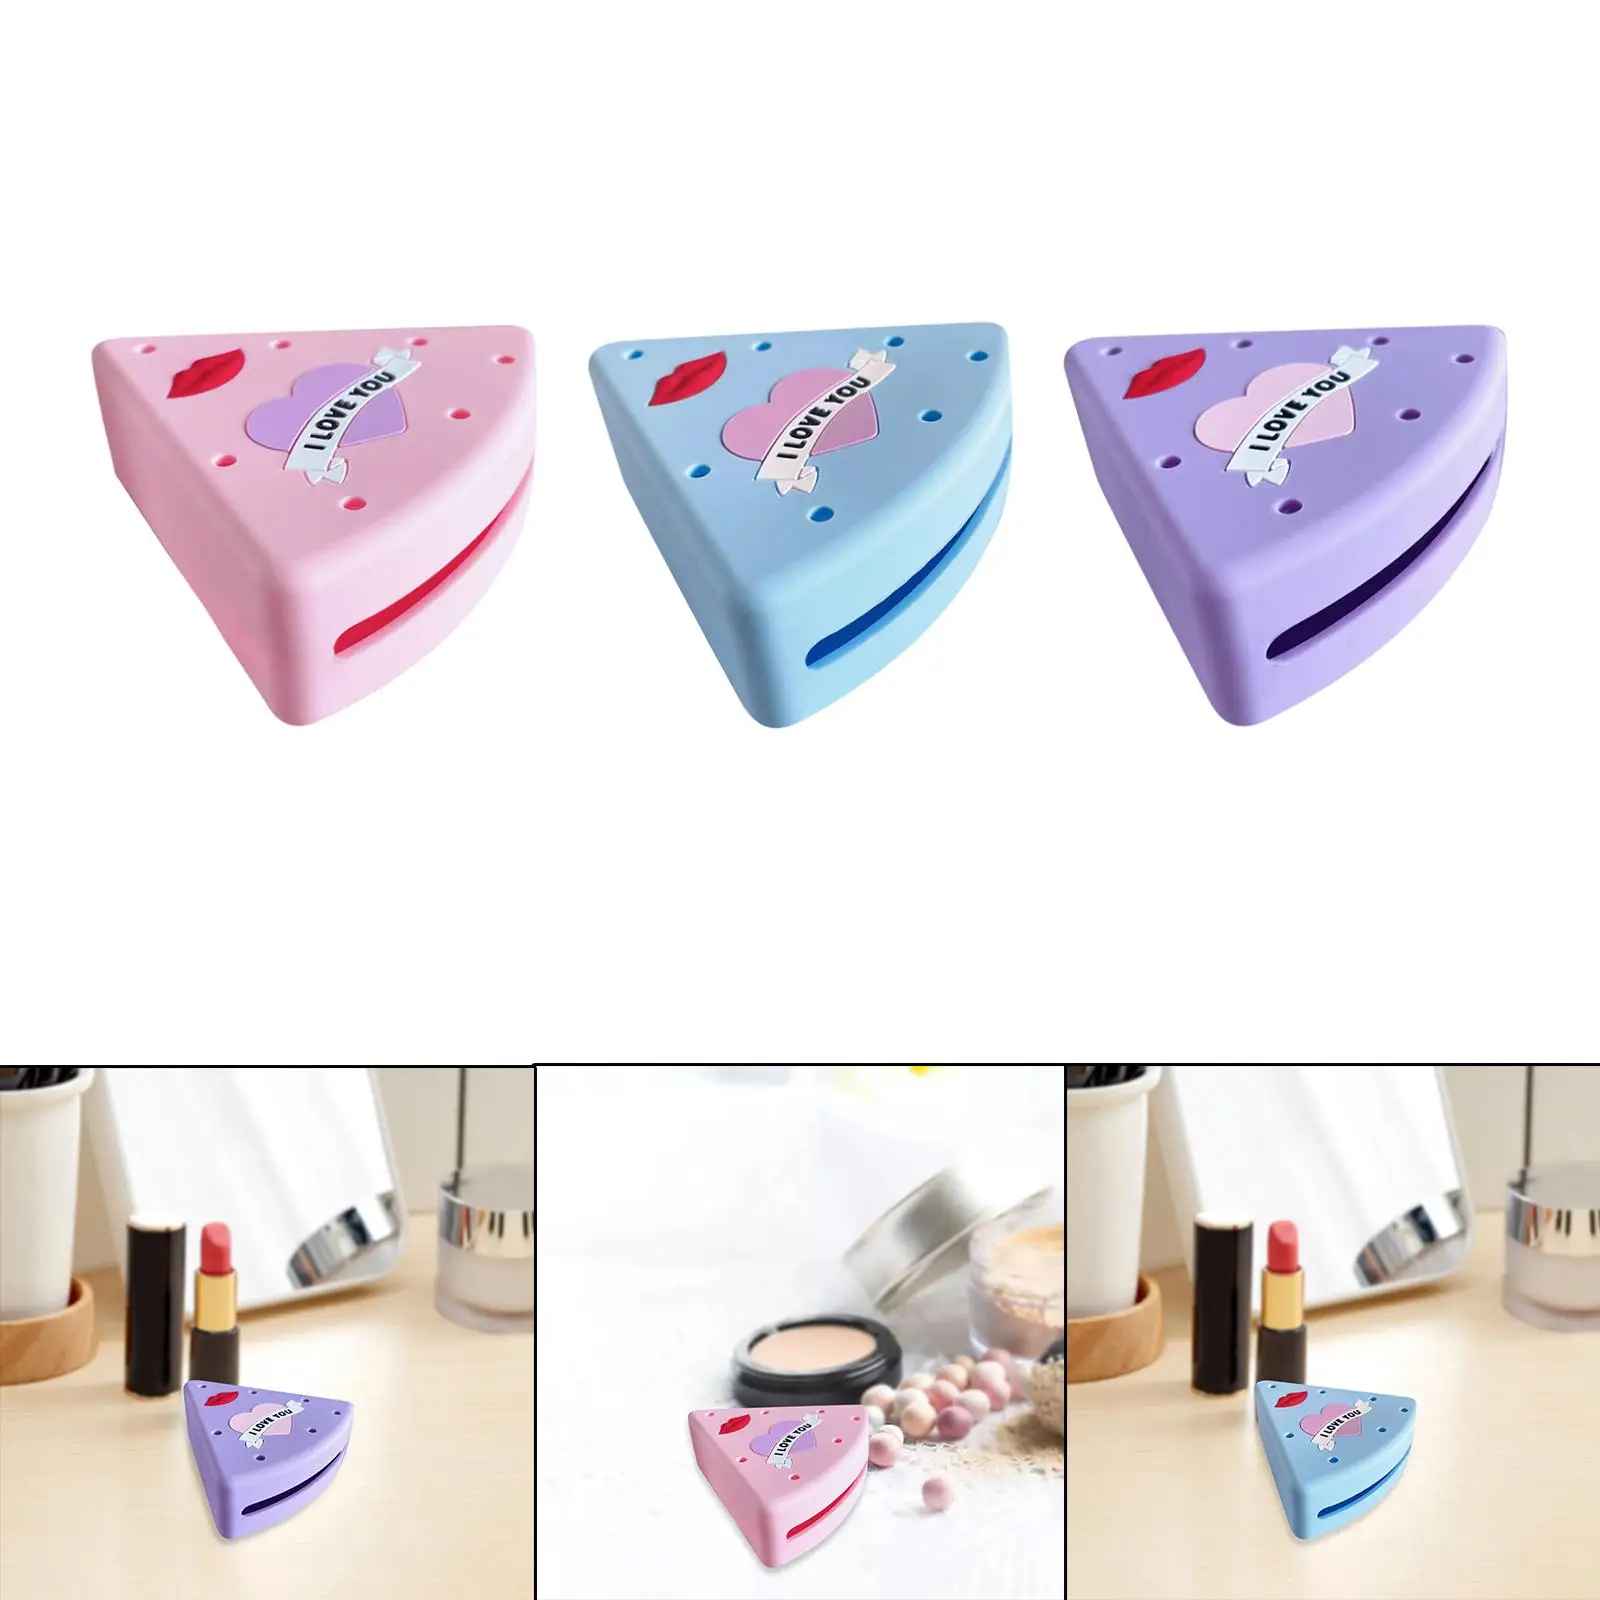 Triangle Makeup Sponge Holder Compact Breathable Cute Protective Container Powder Puff Case Makeup Sponge Storage Box for Travel